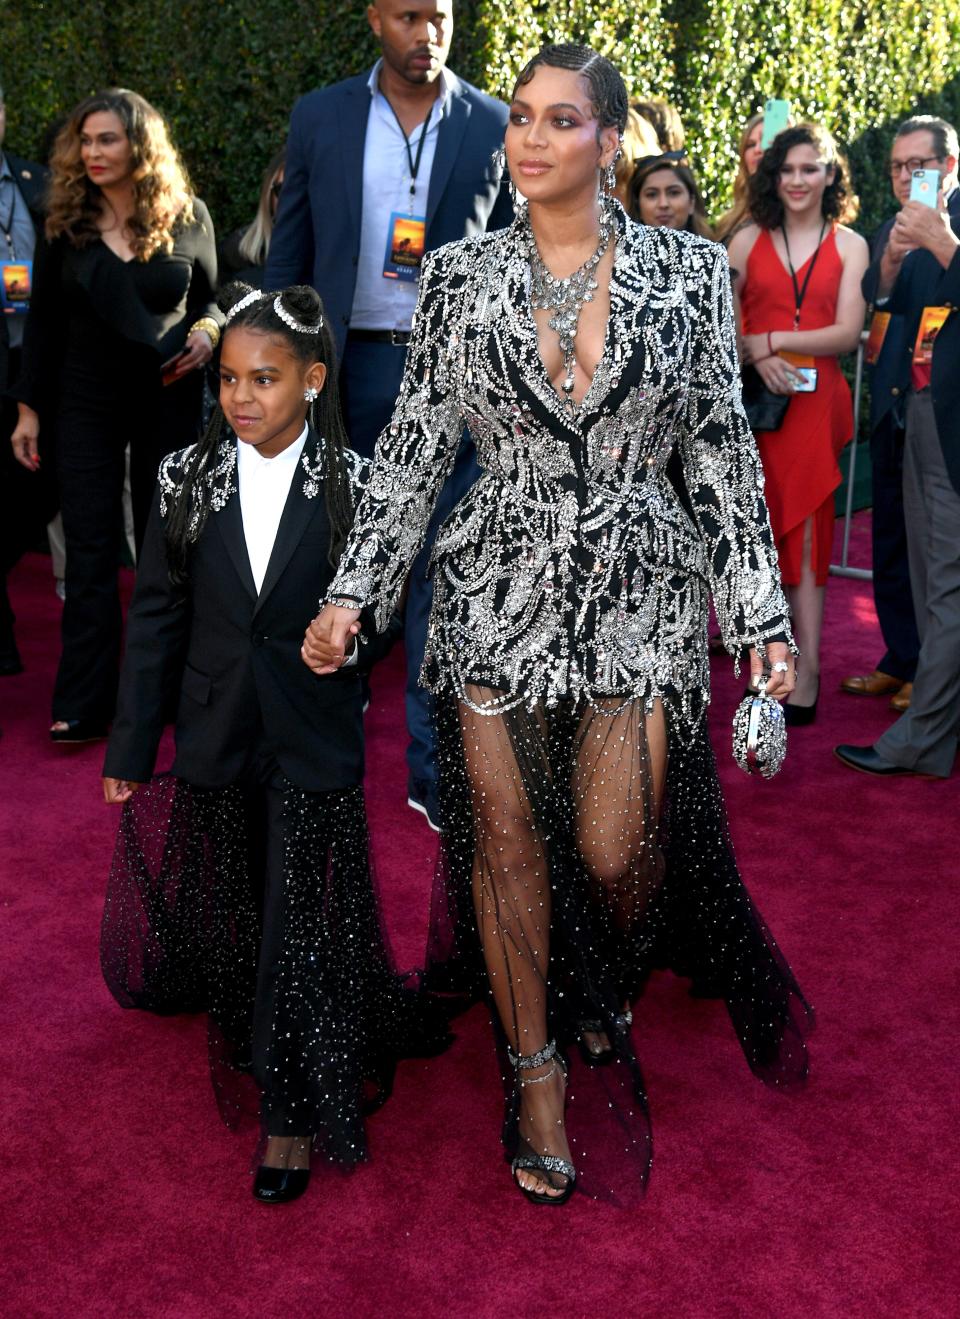 Blue Ivy Carter and Beyoncé at the premiere of The Lion King on July 9, 2019.